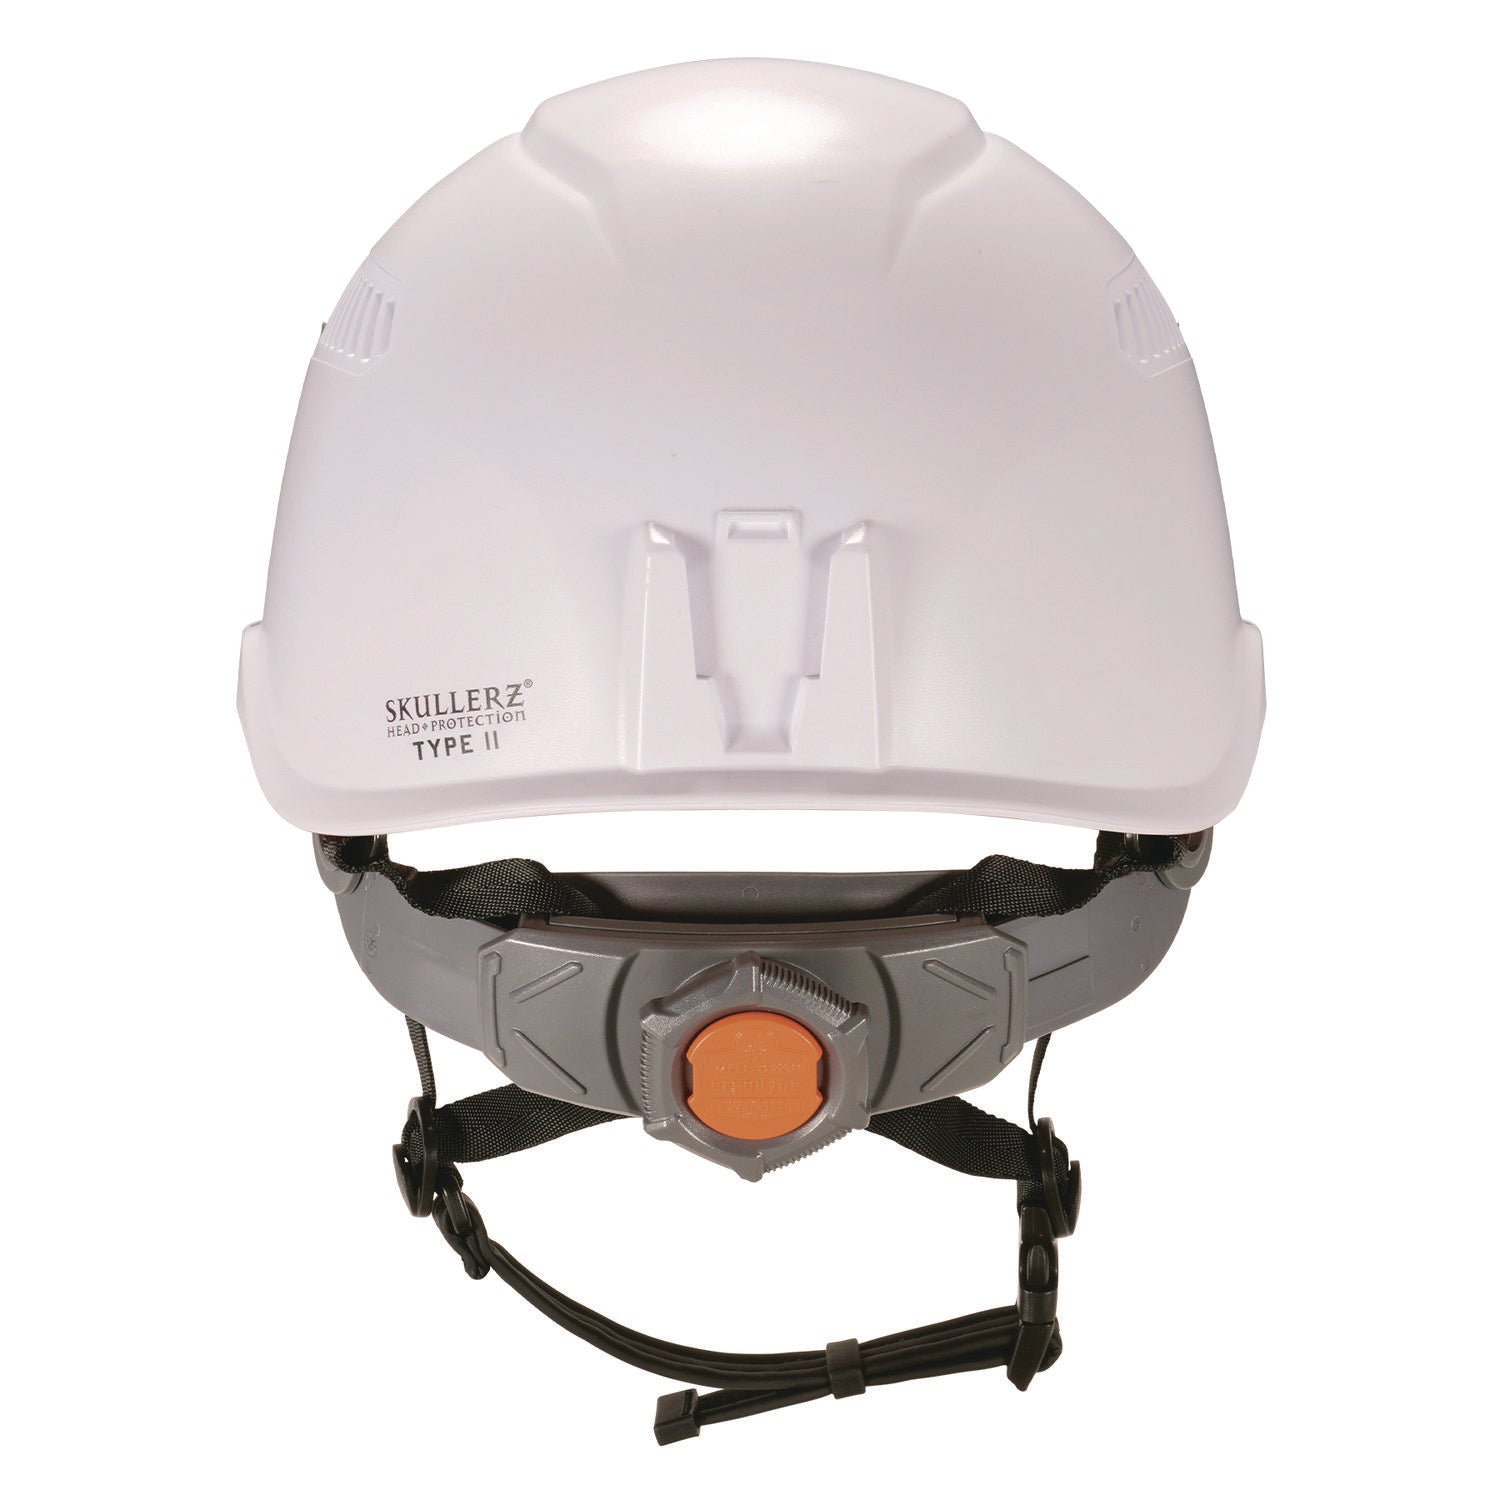 skullerz-8977-class-c-safety-helmet-with-adjustable-venting-6-point-rachet-suspension-white-ships-in-1-3-business-days_ego60264 - 2